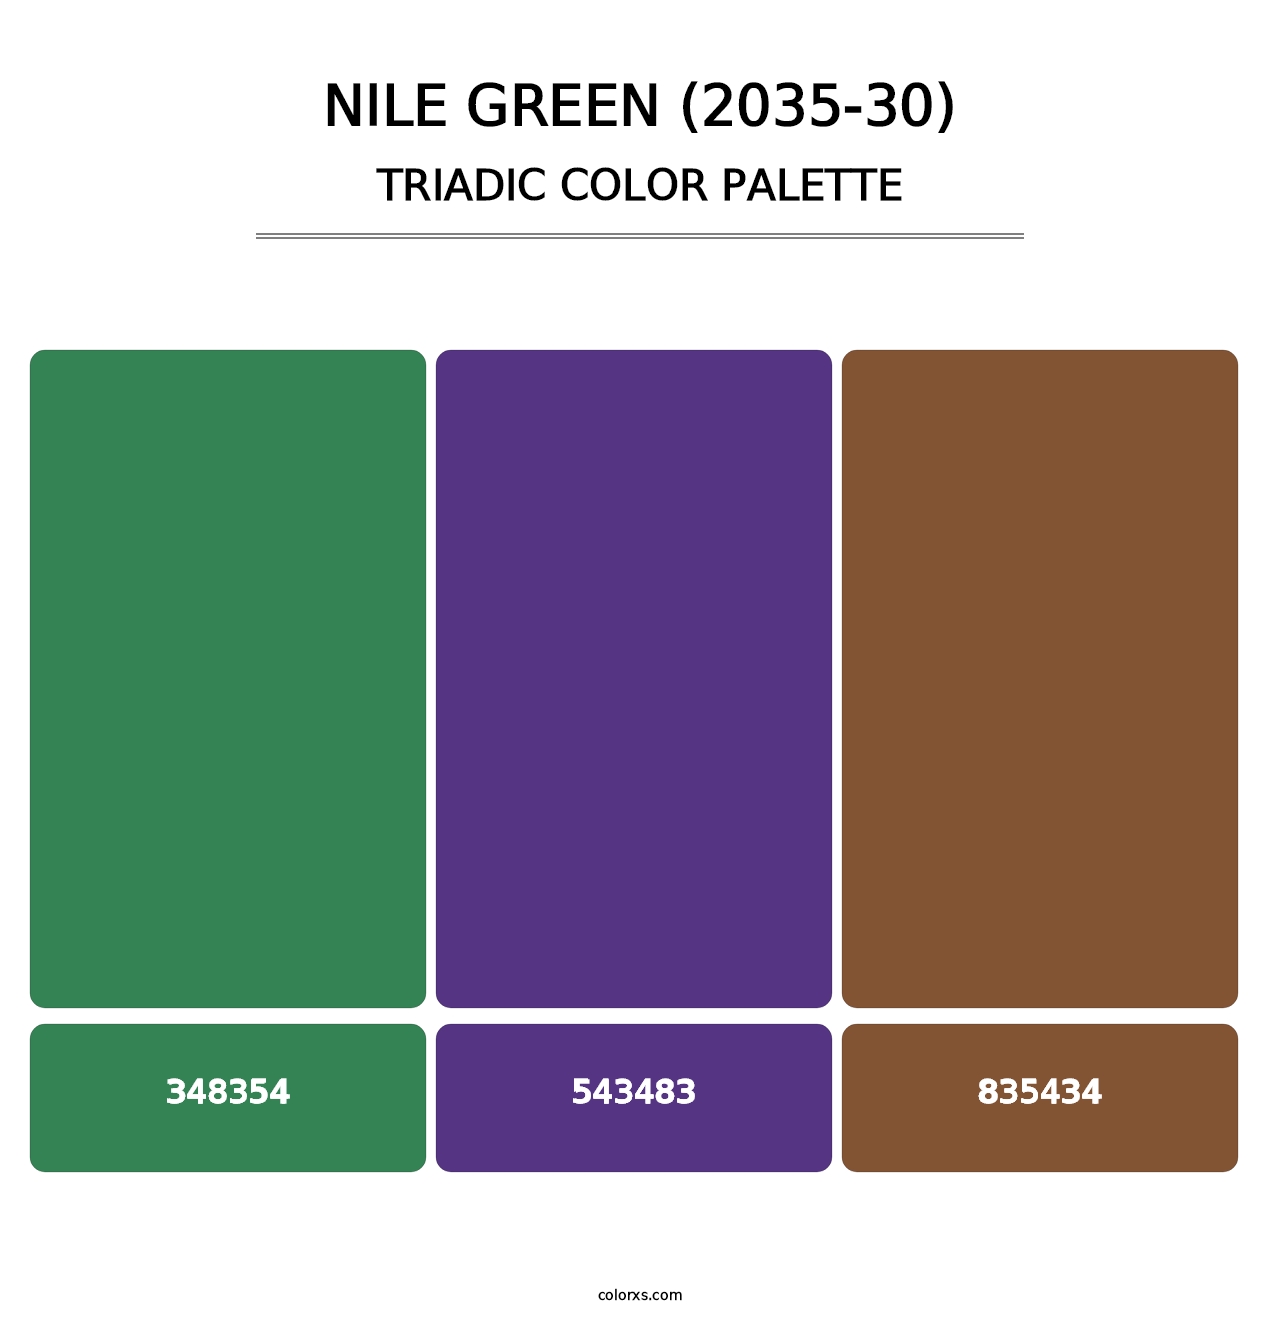 Nile Green (2035-30) - Triadic Color Palette